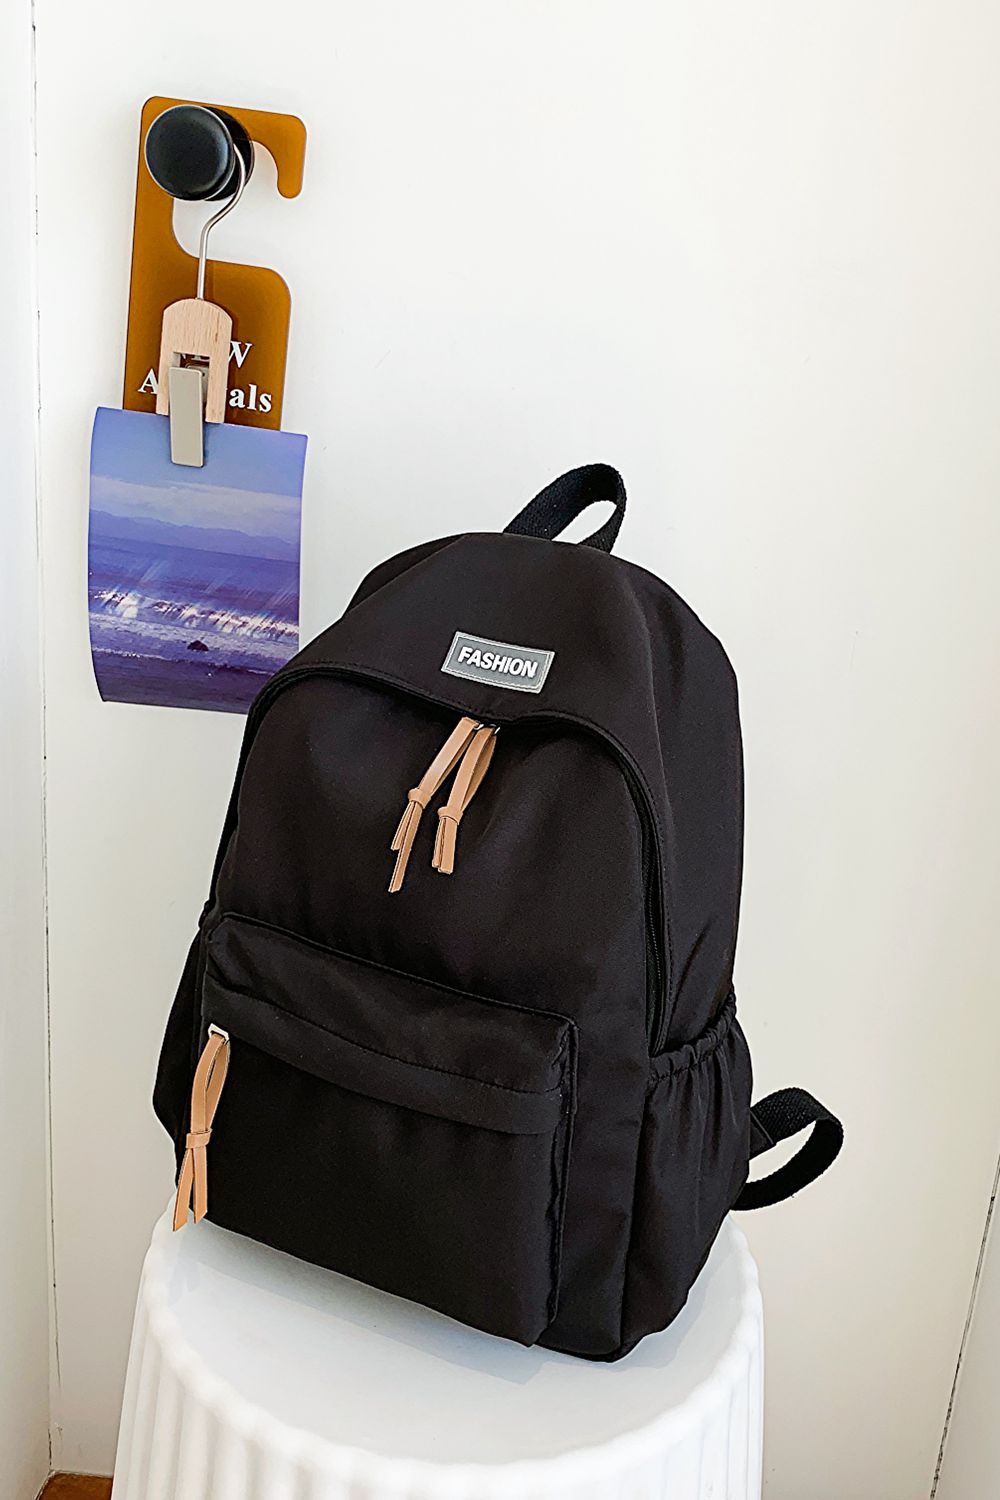 Uylee's Boutique FASHION Polyester Backpack